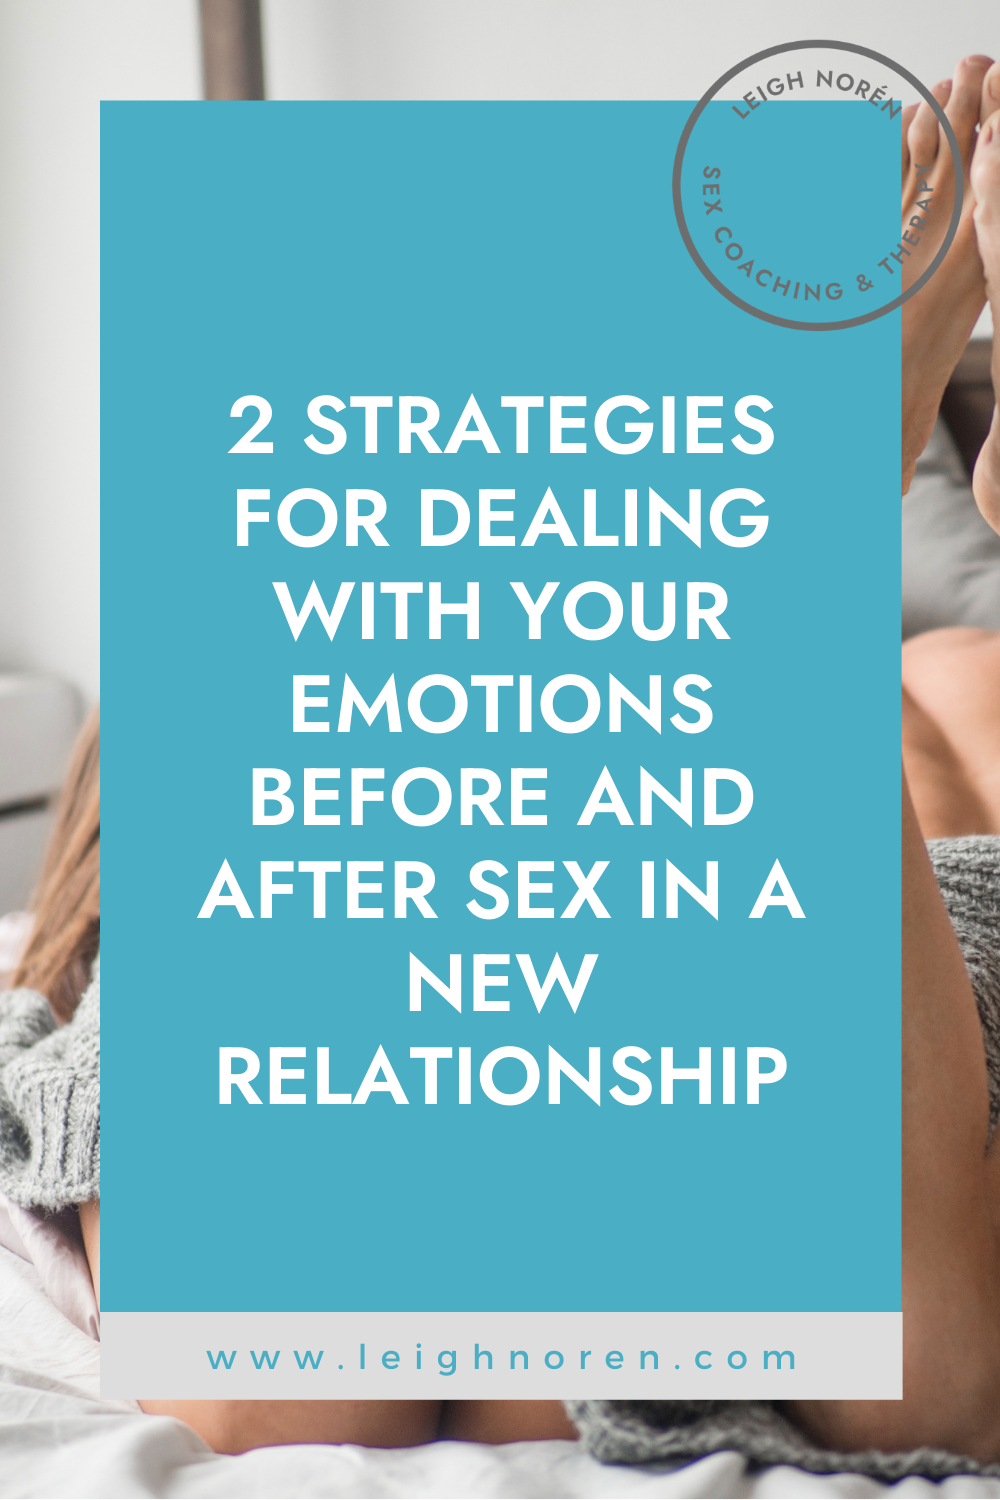 2 Strategies For Dealing With Your Emotions Before And After Sex In A New Relationship